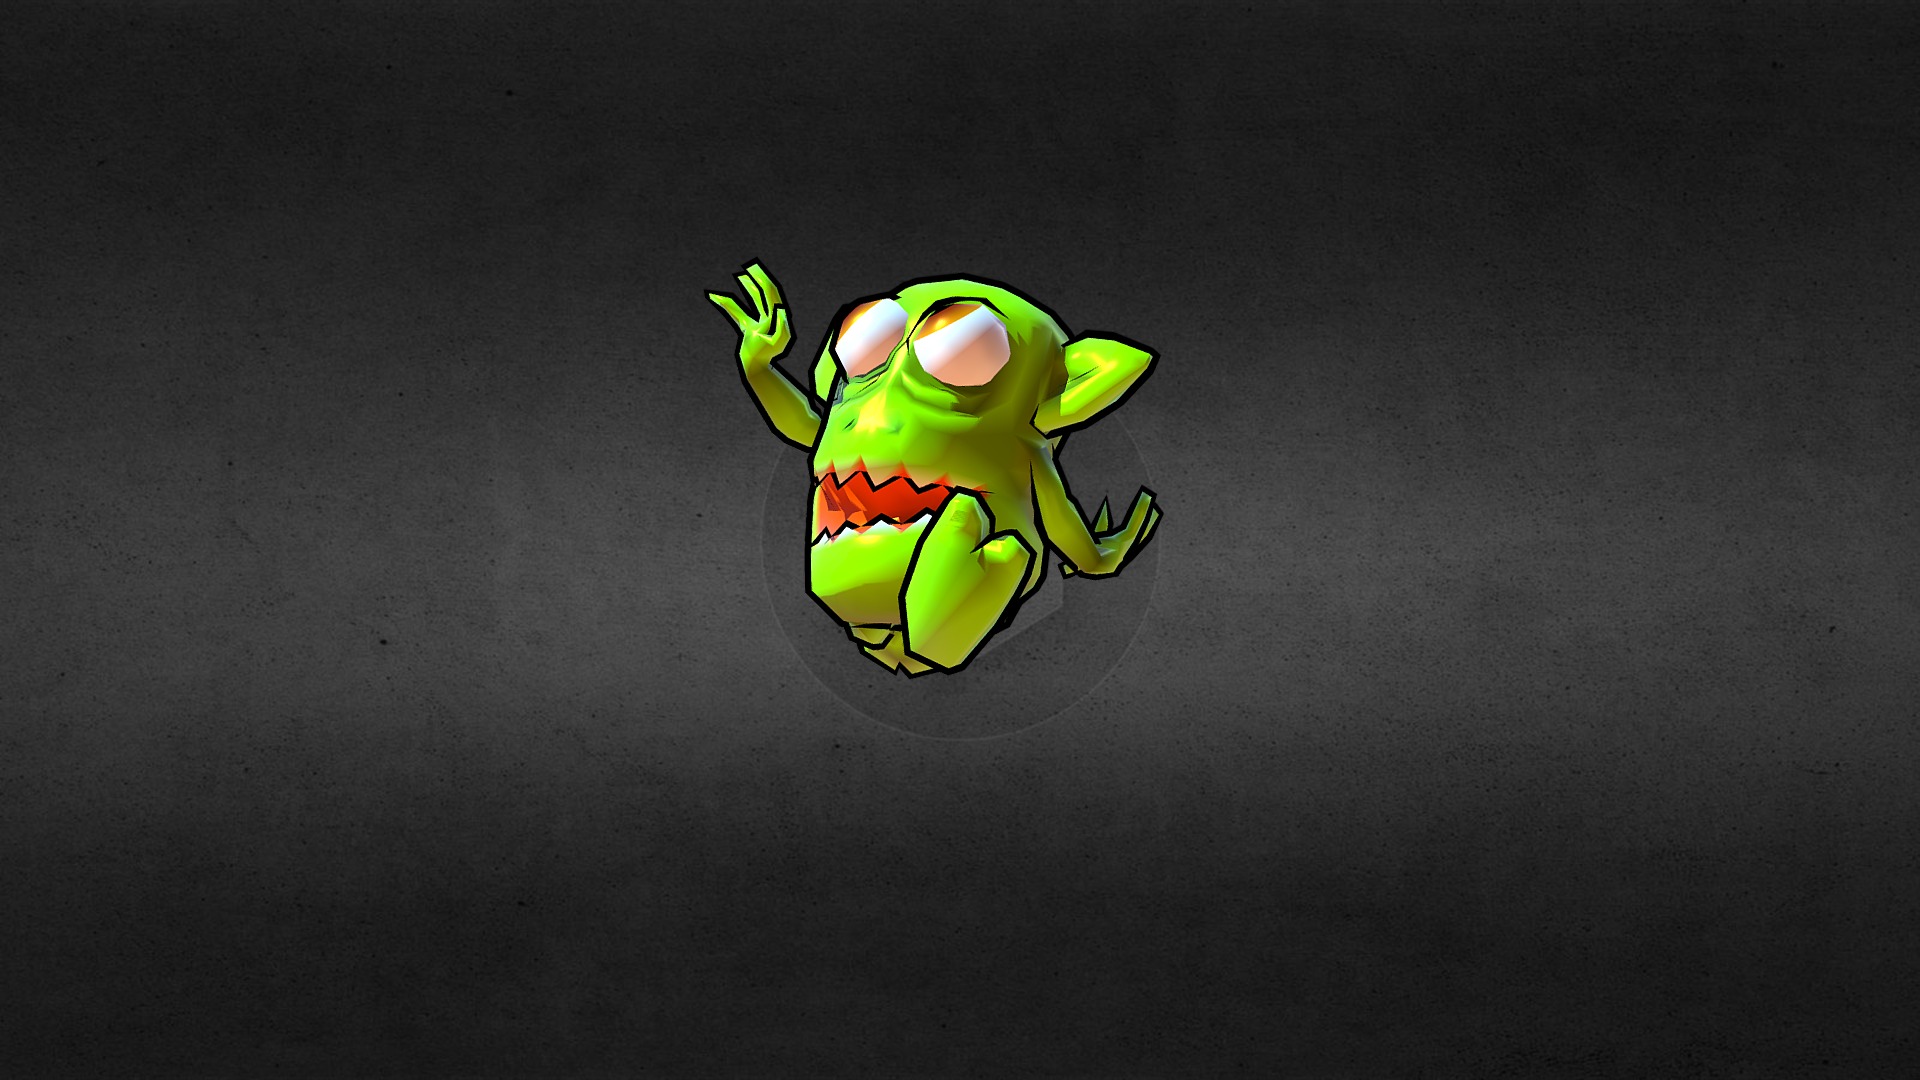 3D model mad dancing mini troll - This is a 3D model of the mad dancing mini troll. The 3D model is about a green and yellow toy.